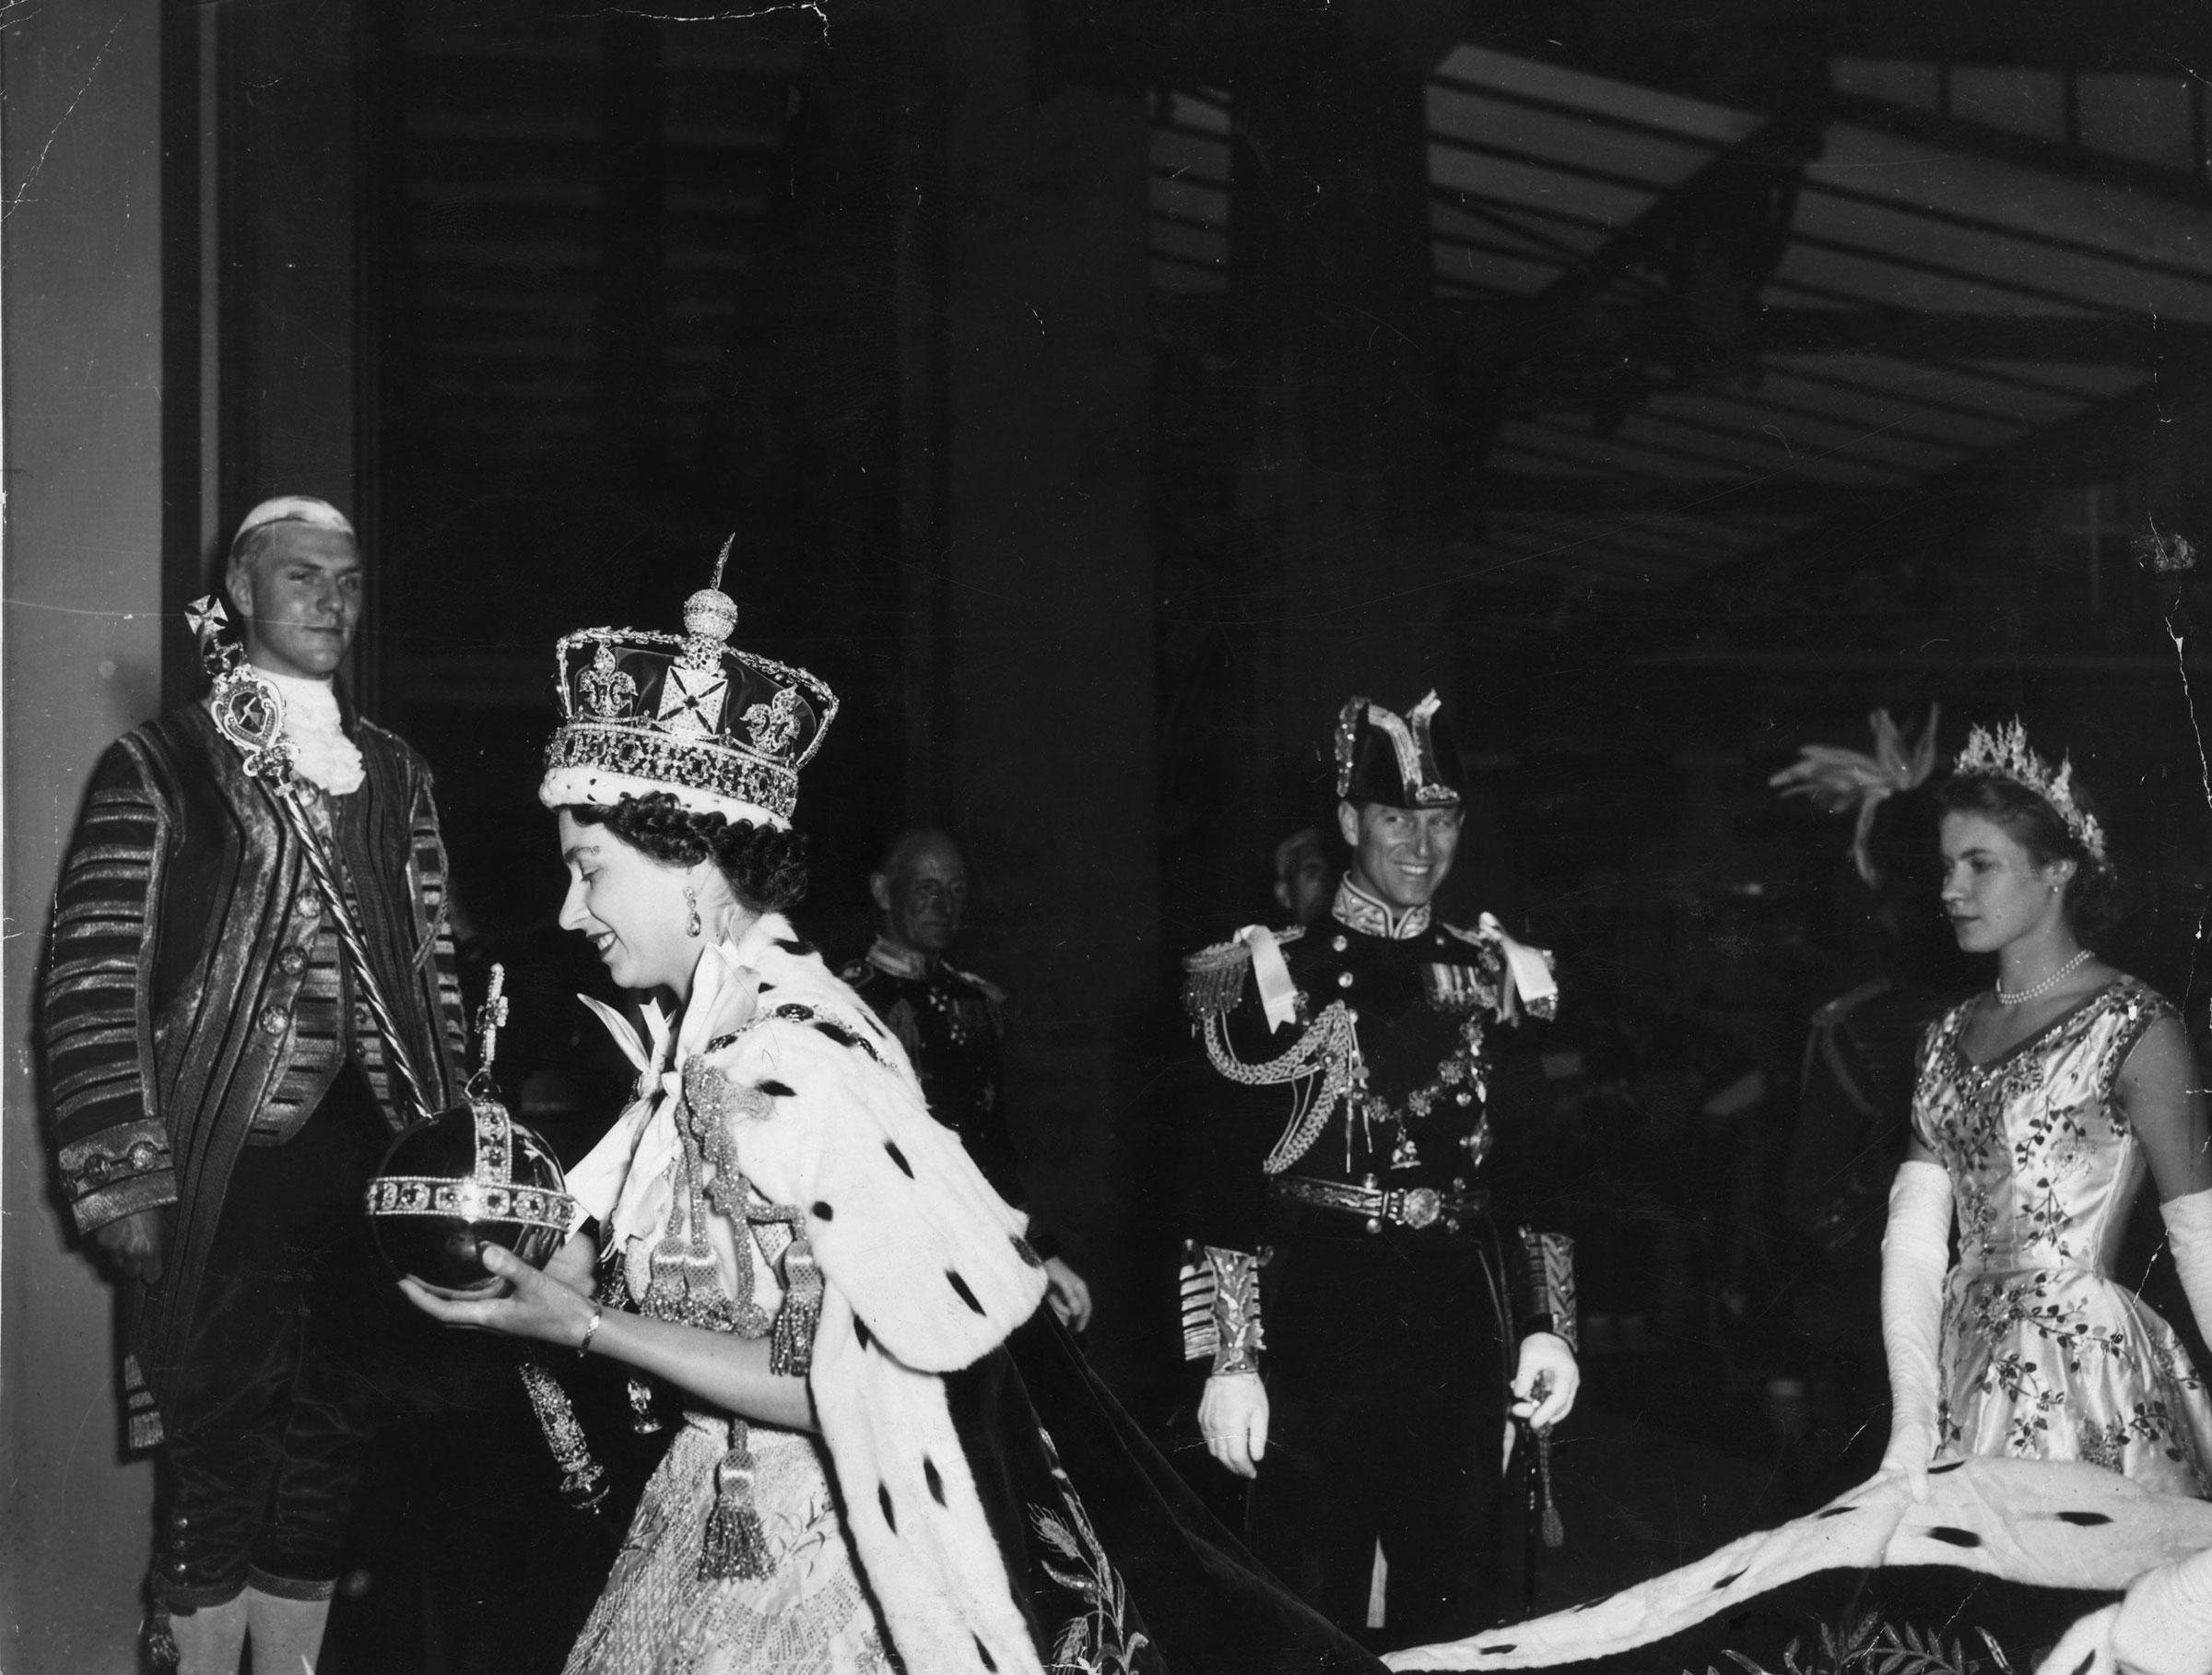 Queen Elizabeth II, wearing the Imperial State crown and carrying the Orb and Sceptre, returns to Buckingham Palace from Westminster Abbey, London, following her Coronation. (Topical Press Agency/Getty Images)